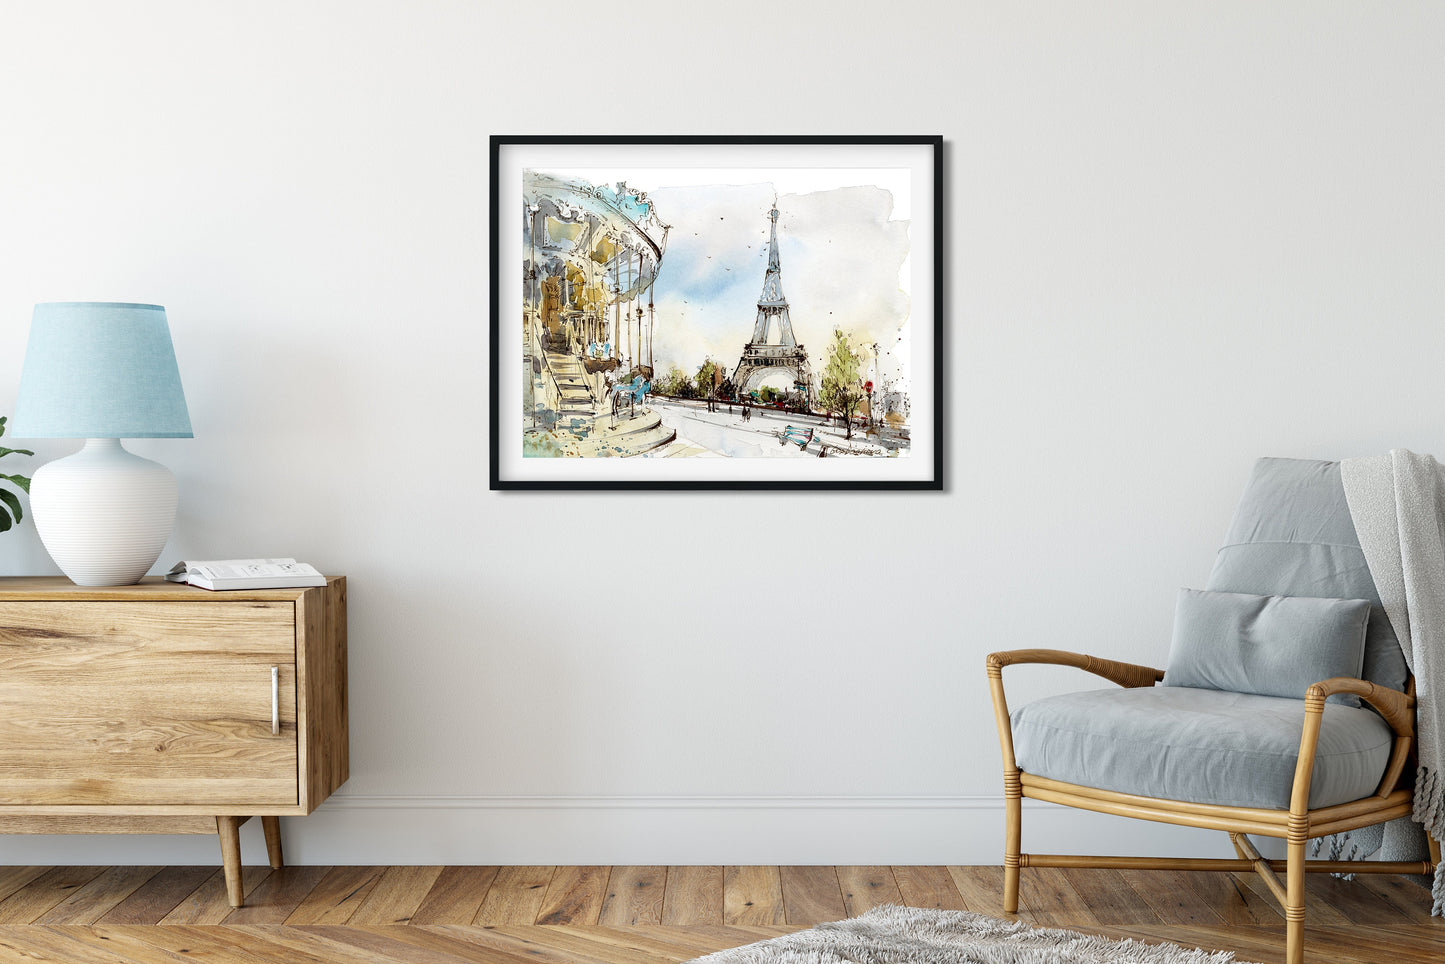 Paris Carousel Print, Eiffel Tower Wall Art, French City Illustration, France Colorful Painting, Travel Decor